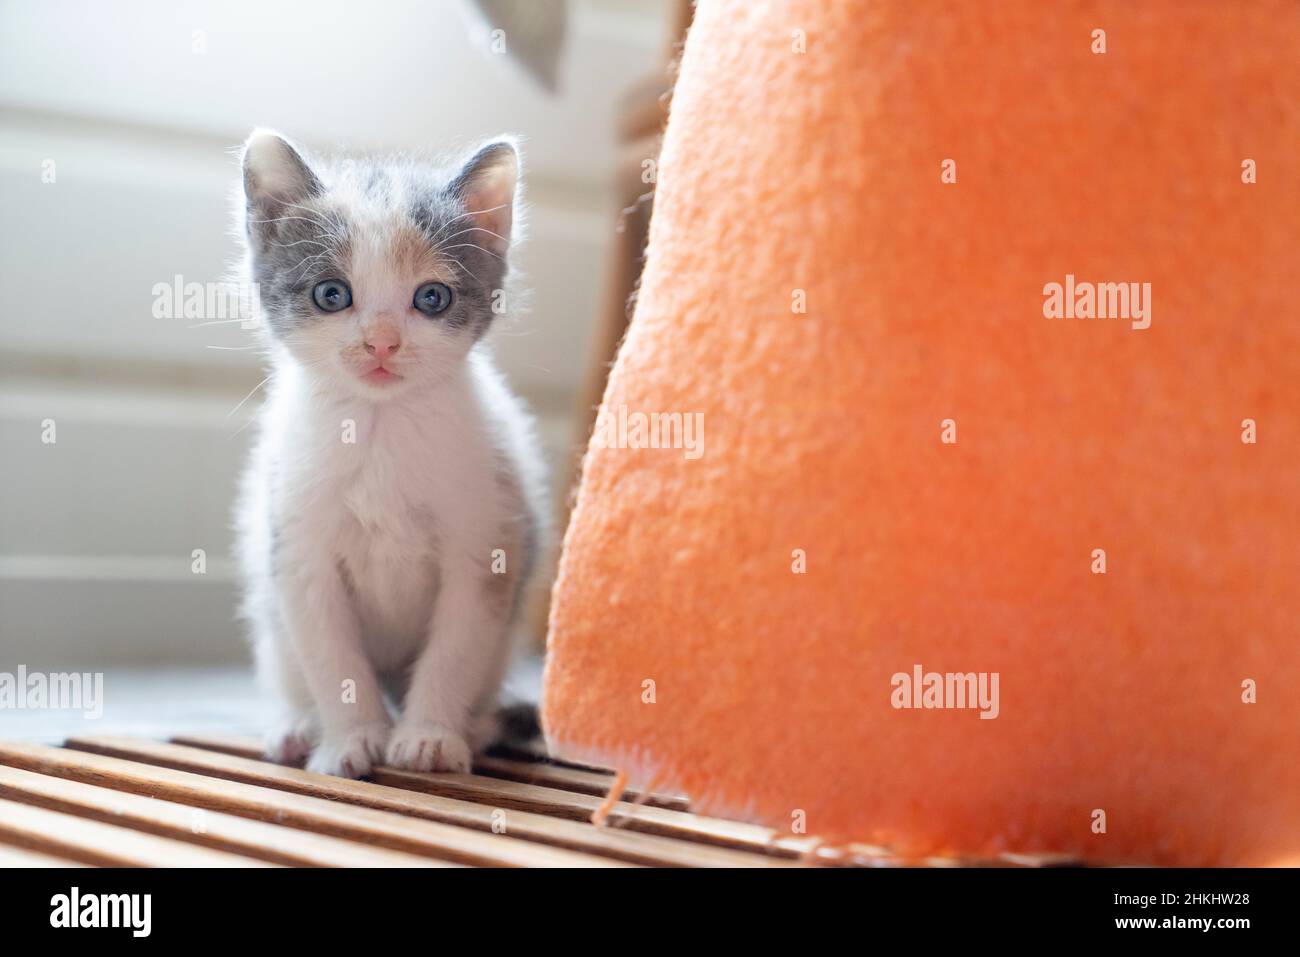 A Cute shy little Grey and white young cat or kitten looking at the camera from behind a blanket Stock Photo